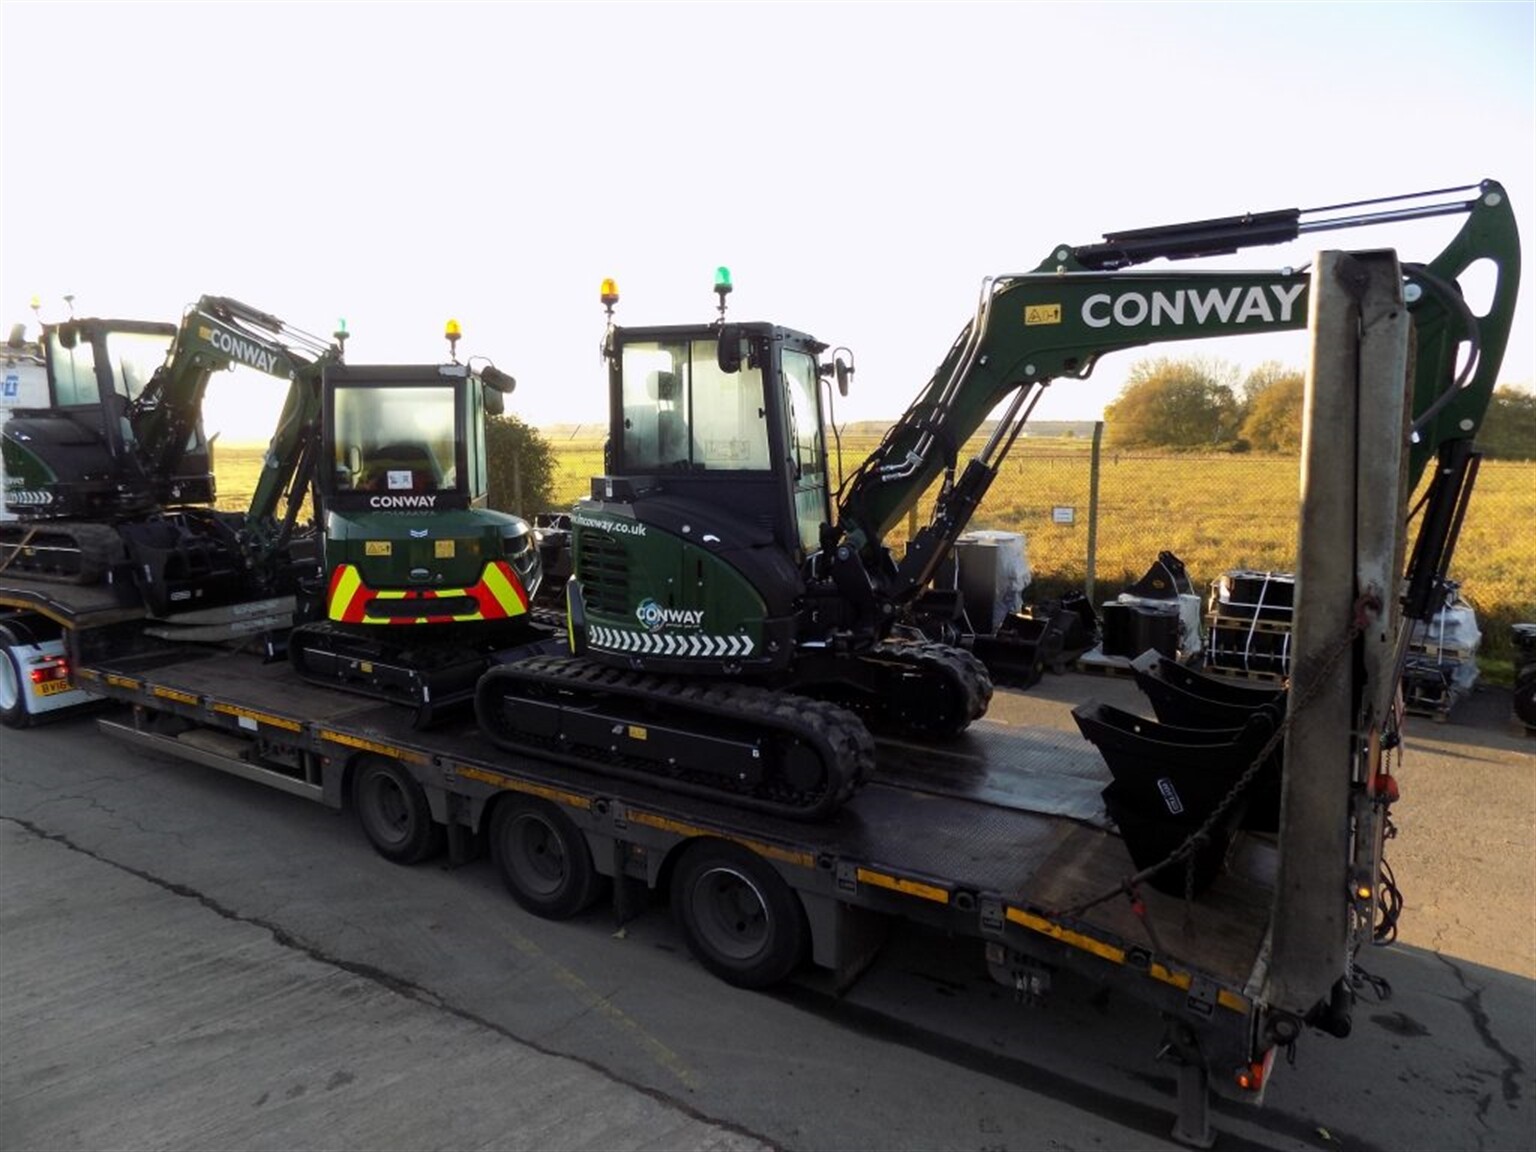 Yanmar's in the green for Conway